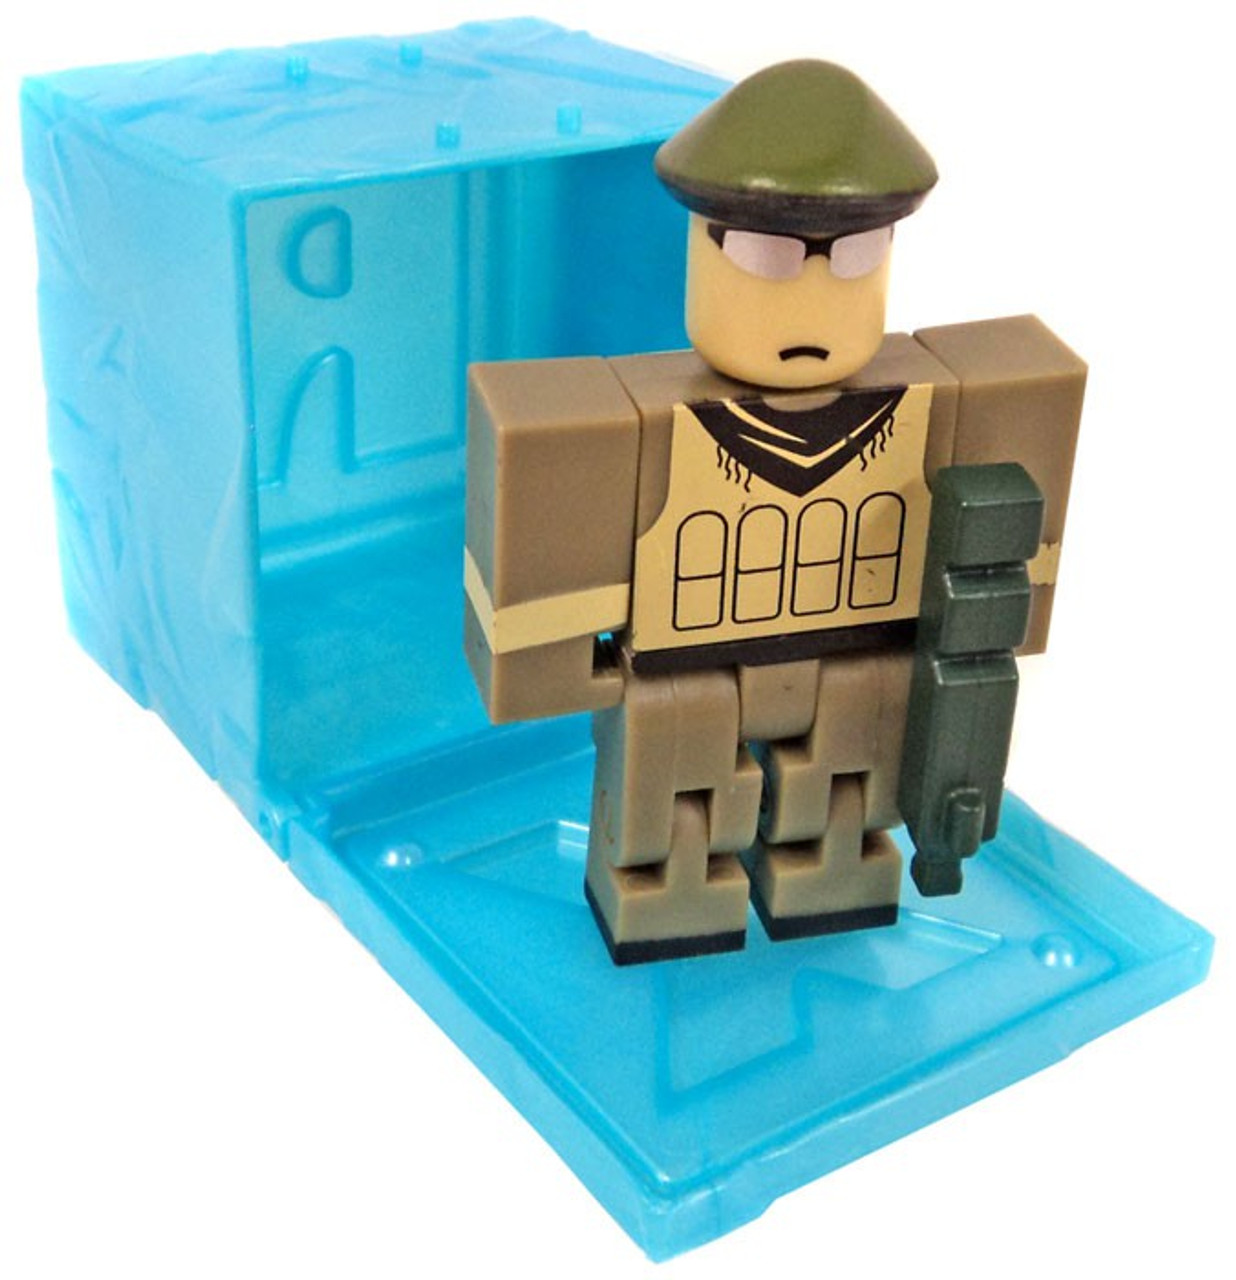 Ndjnnehxvjuglm - details about roblox red series 3 lumberjack tycoon mini figure blue cube with online code